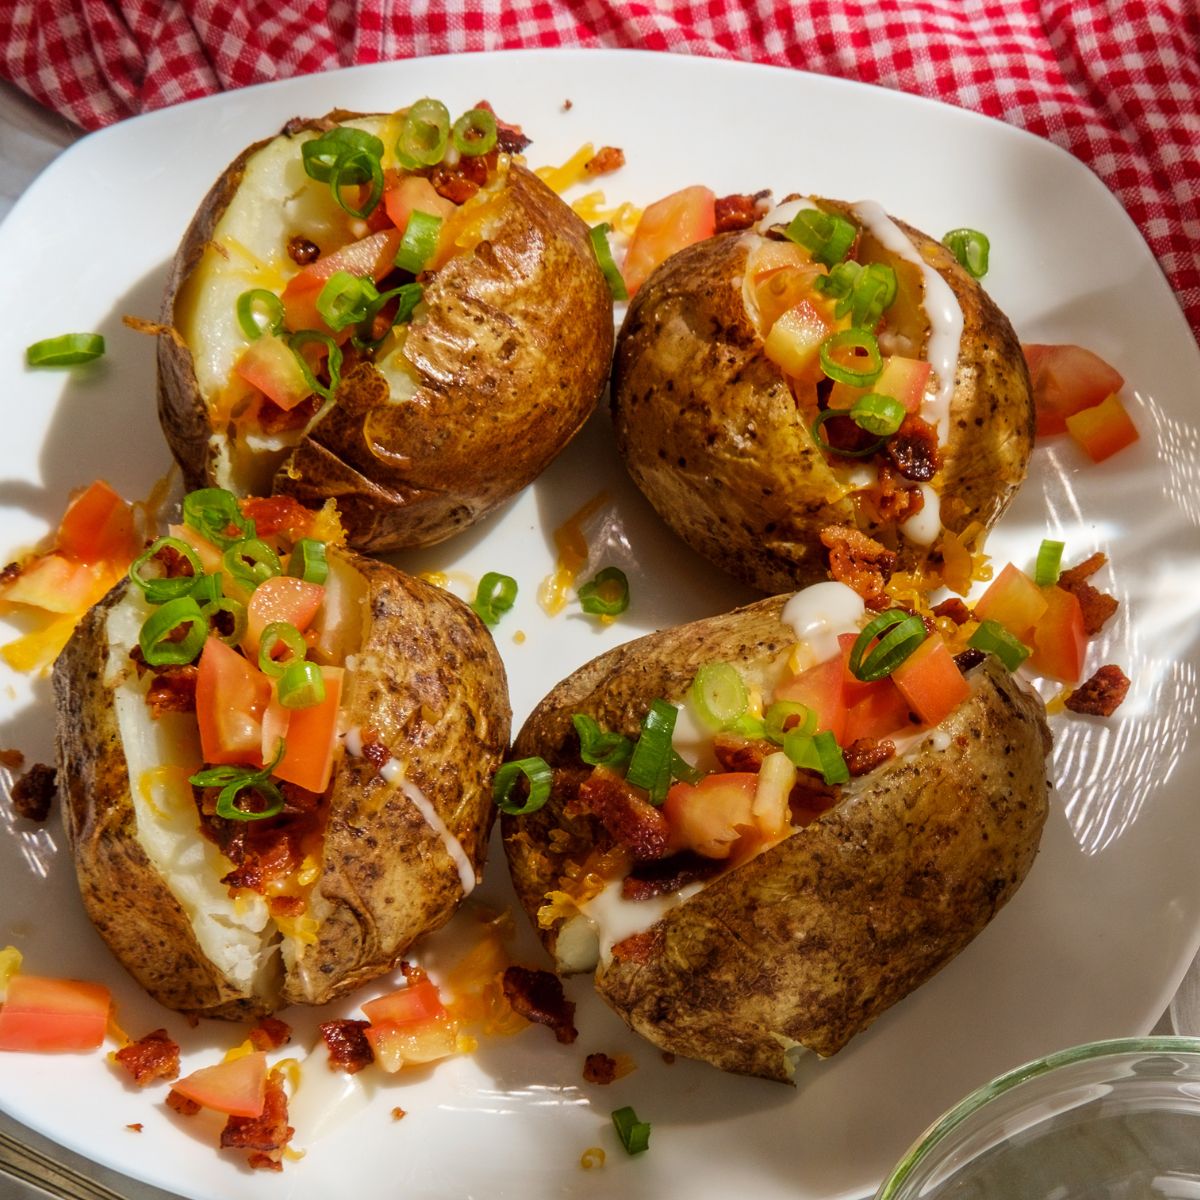 Baked potatoes topped with fresh tomato and herbs